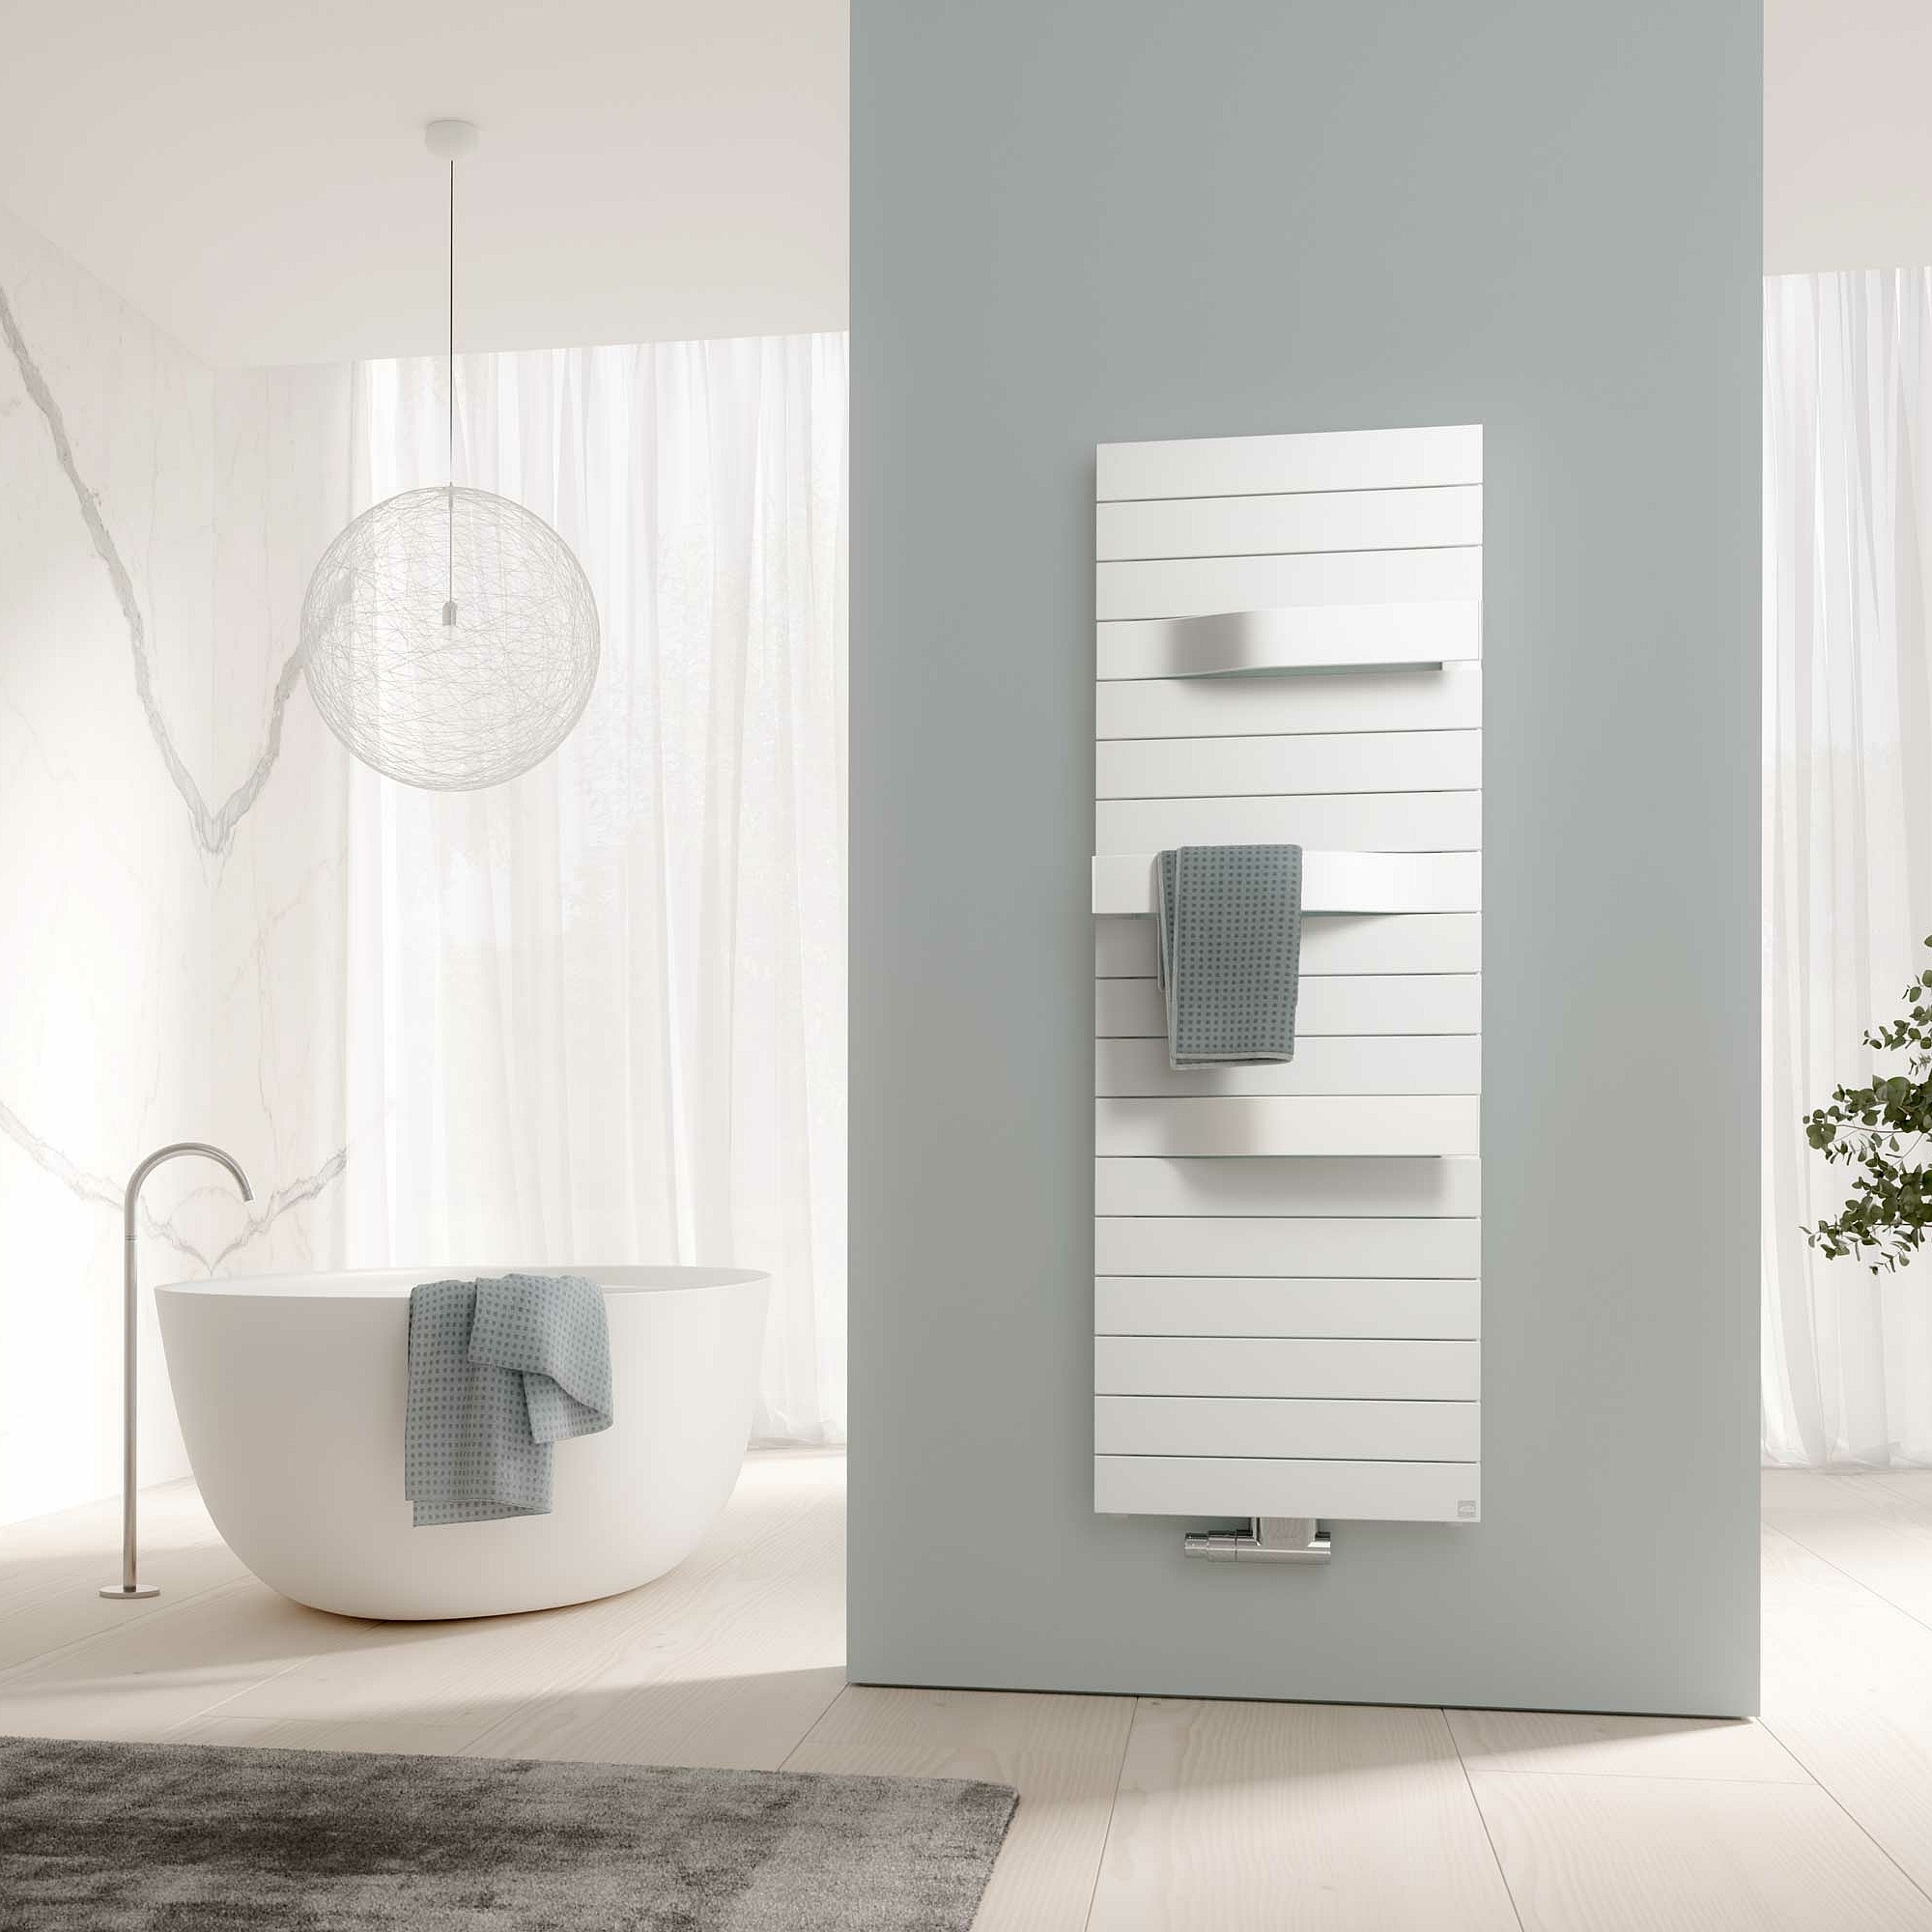 Kermi Tabeo designer and bathroom radiators – experience beauty and comfort in one.